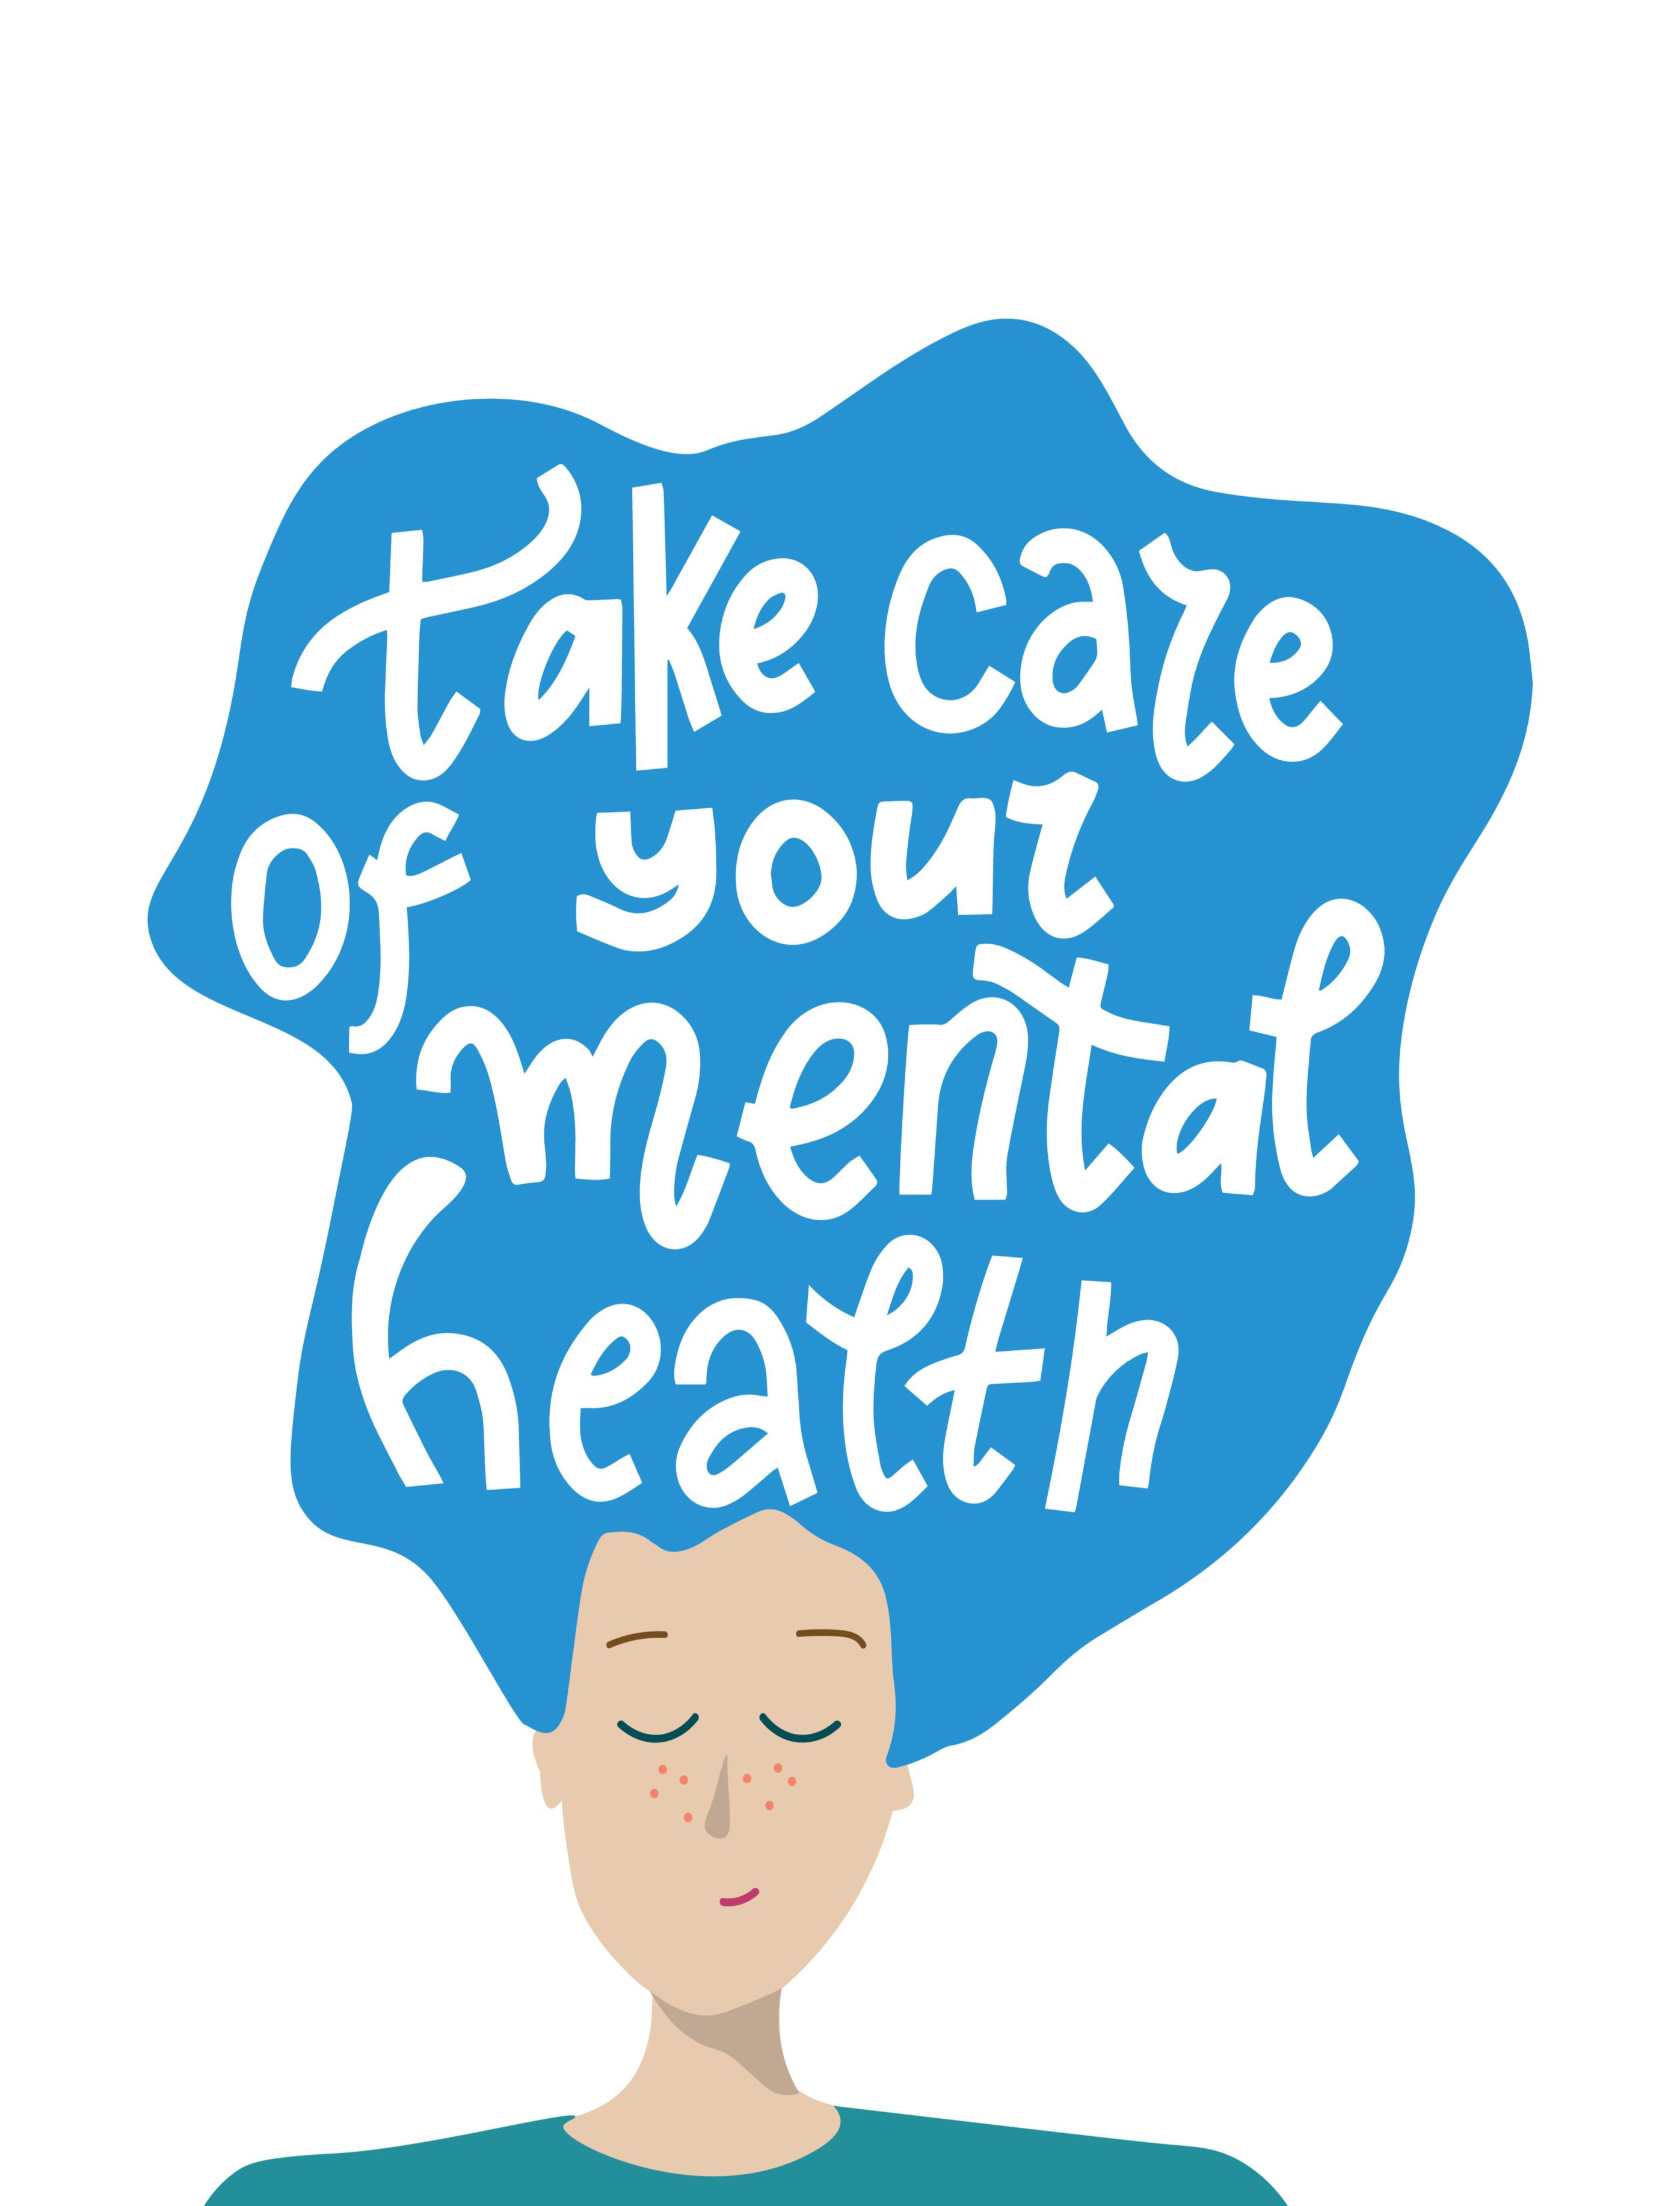 Take care of your mental health illustration